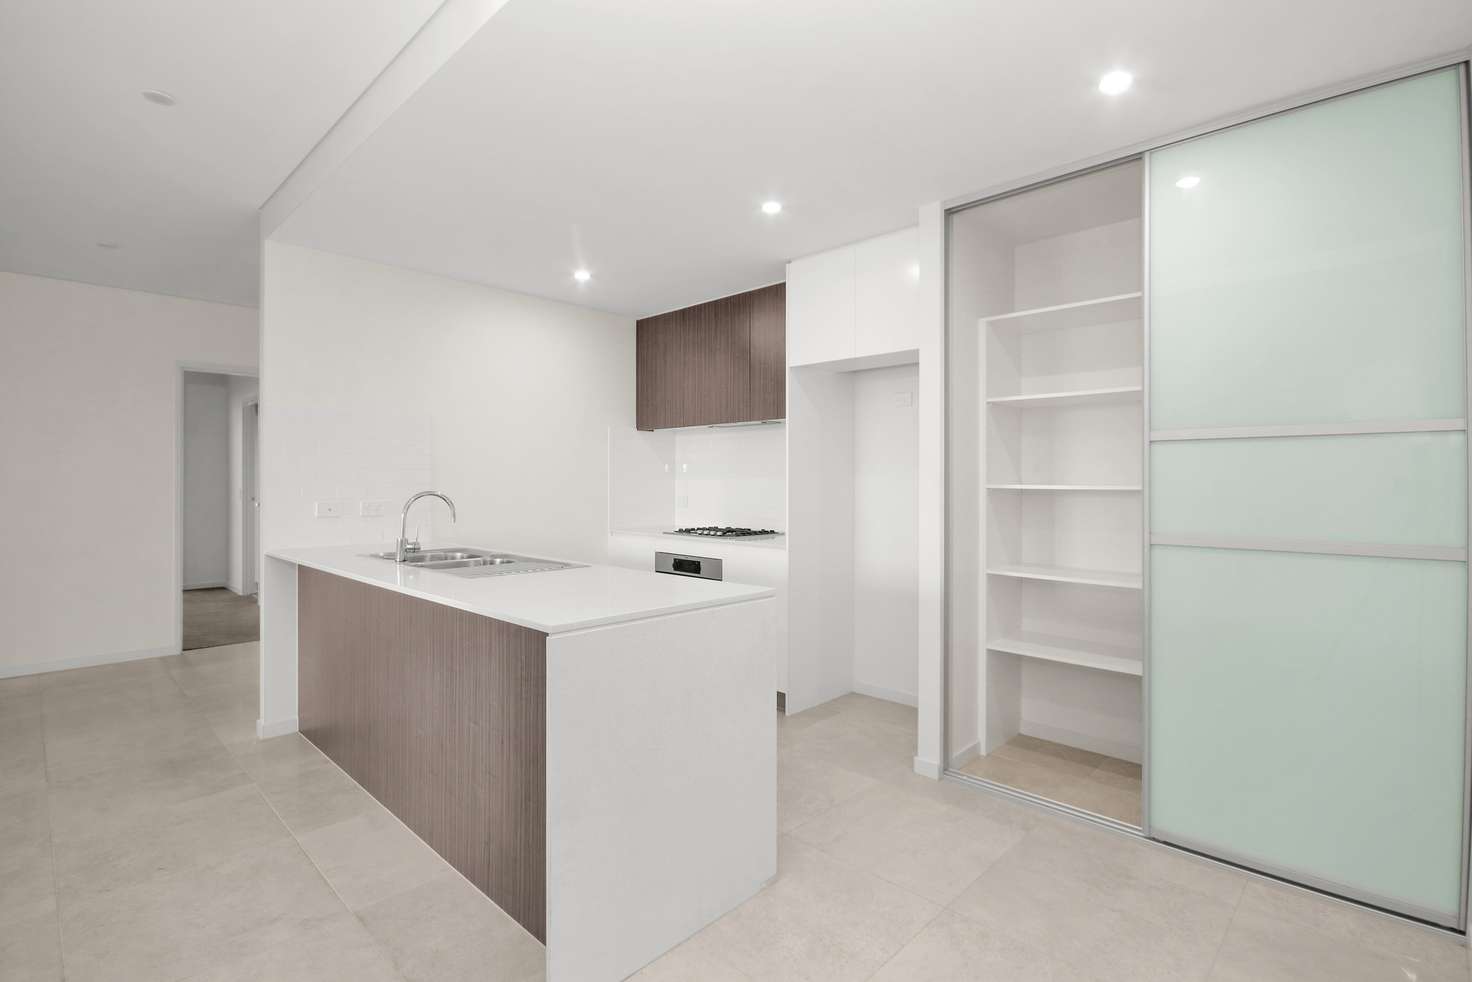 Main view of Homely apartment listing, 7/6 Bingham Street, Schofields NSW 2762